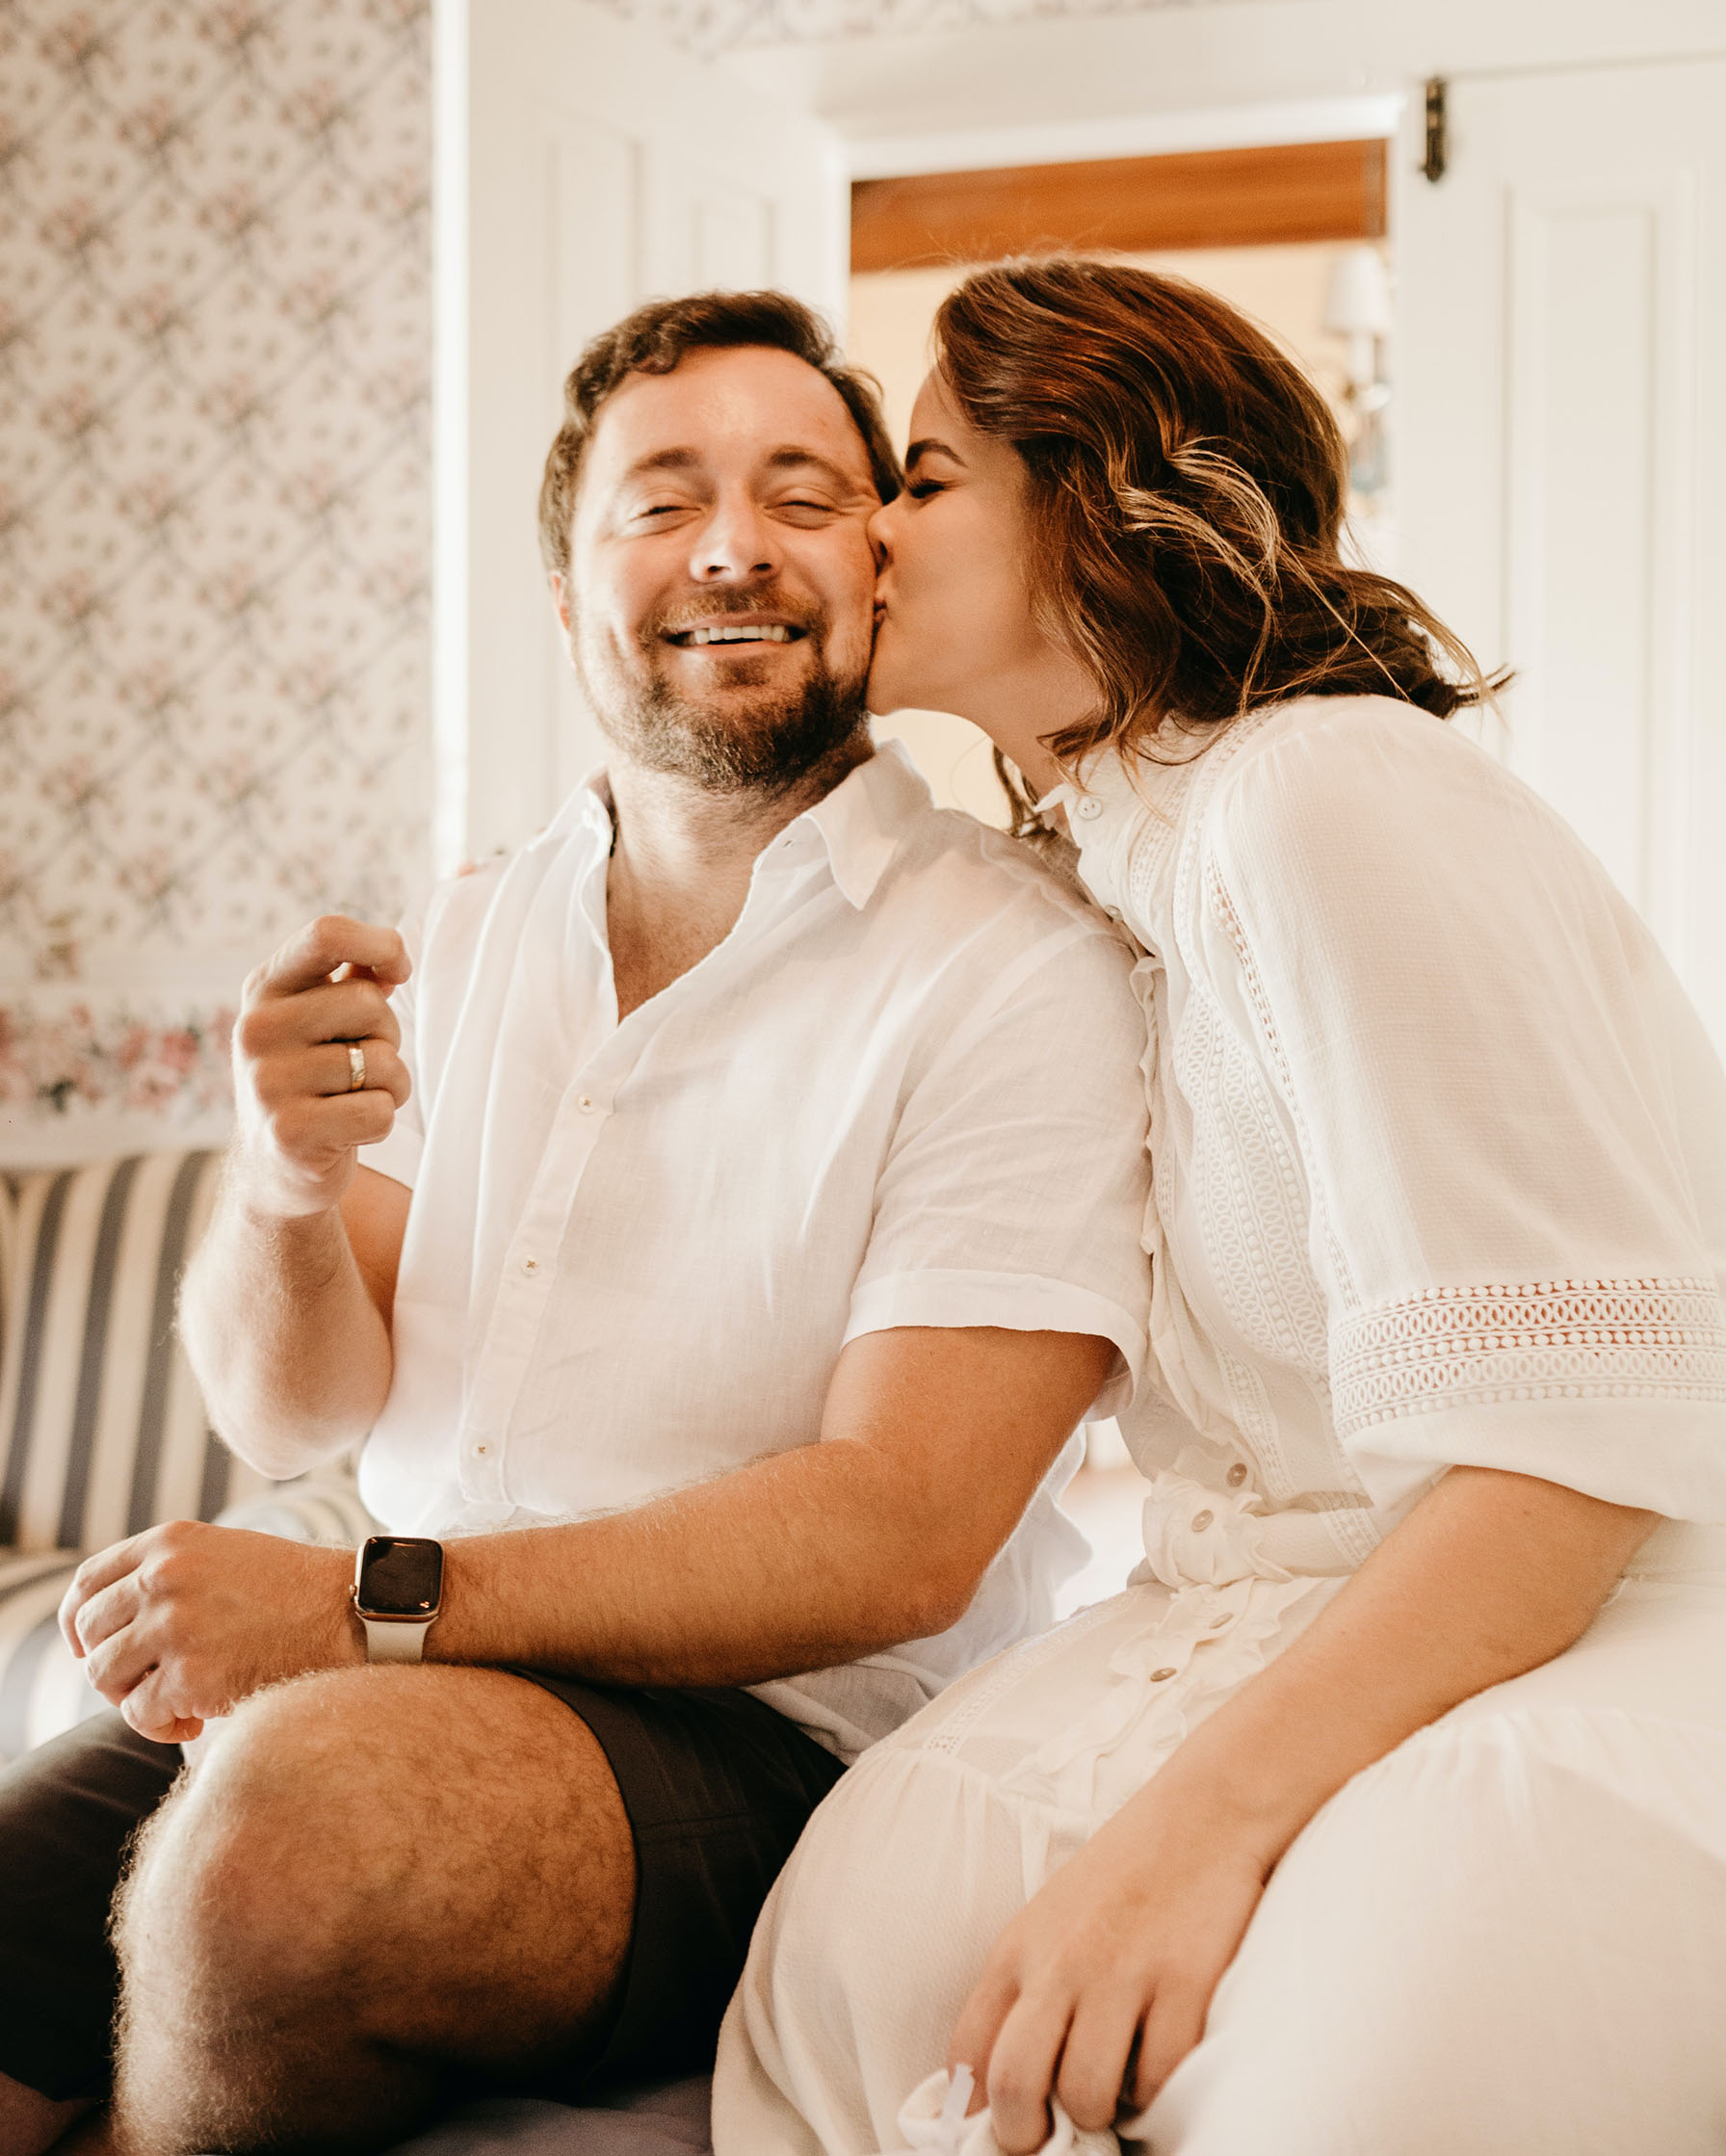 A bearded man being kissed on the cheek by his wife. Both are sitting and dressed in white shirts.